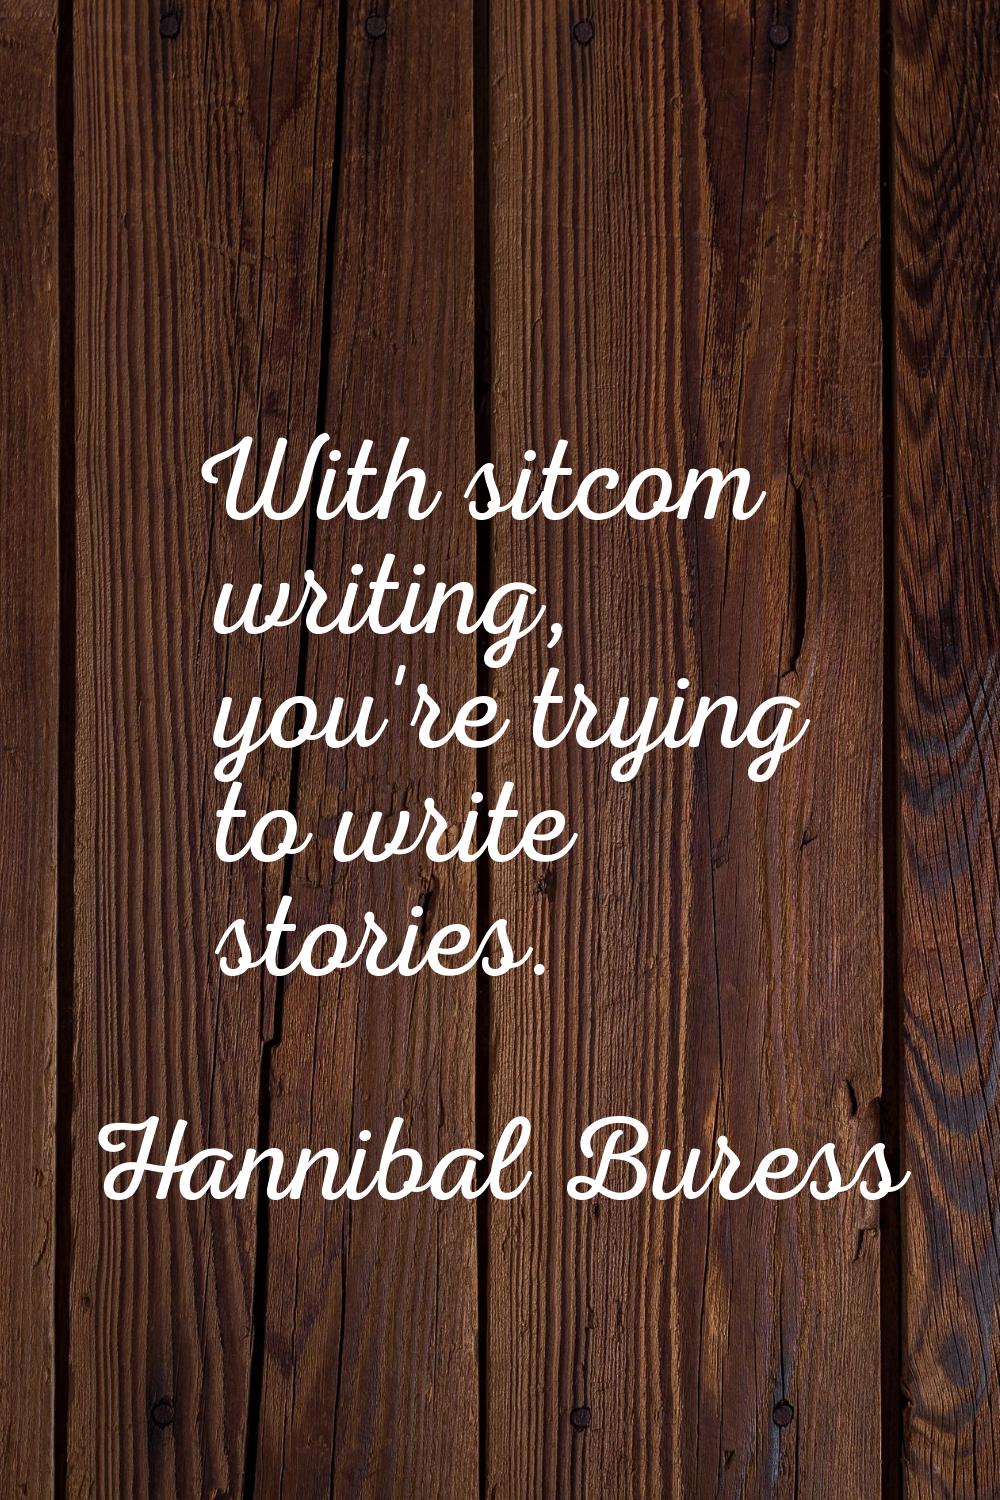 With sitcom writing, you're trying to write stories.